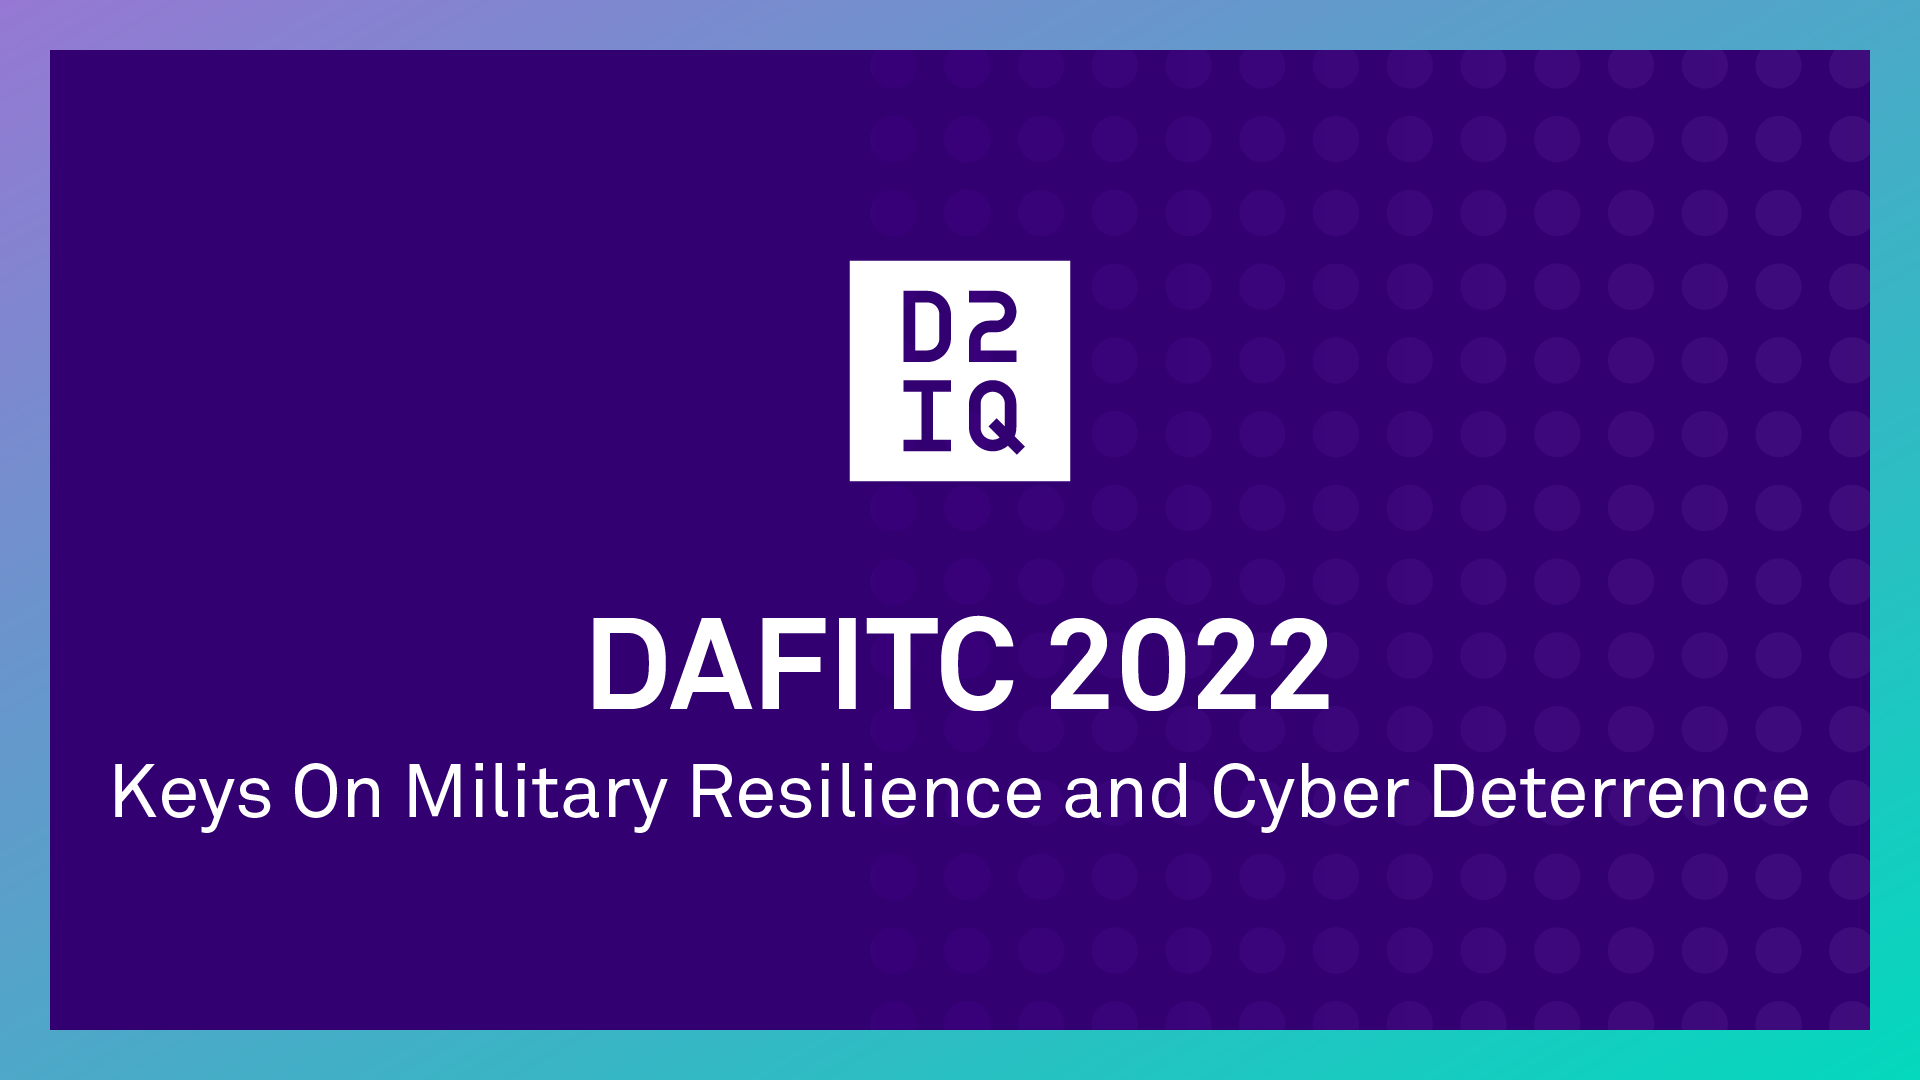 DAFITC 2022 Keys On Military Resilience and Cyber Deterrence